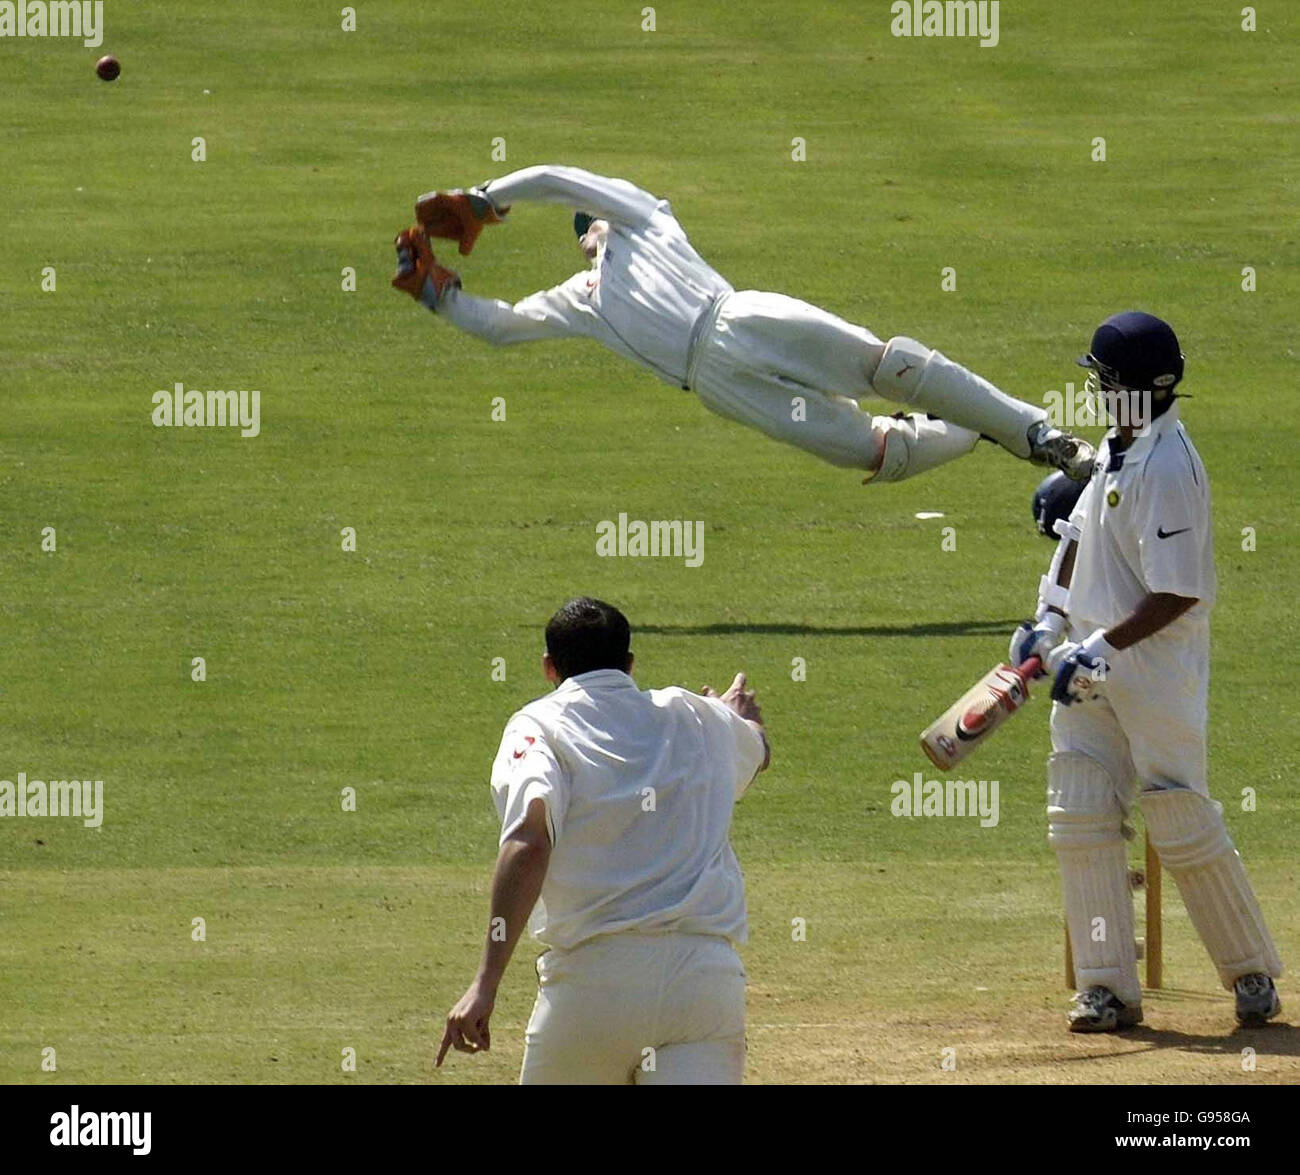 England wicketkeeper Geraint Jones dives to try and take a catch to dismiss Indian batsman Gautham Gambhir, off the bowling of Steve Harmison during the second day of the tour match against the Indian Board President's XI at the IPCL Cricket ground, Baroda, India, Friday February 24, 2006. See PA story CRICKET England. PRESS ASSOCIATION Photo. Photo credit should read: Rebecca Naden/PA. Stock Photo